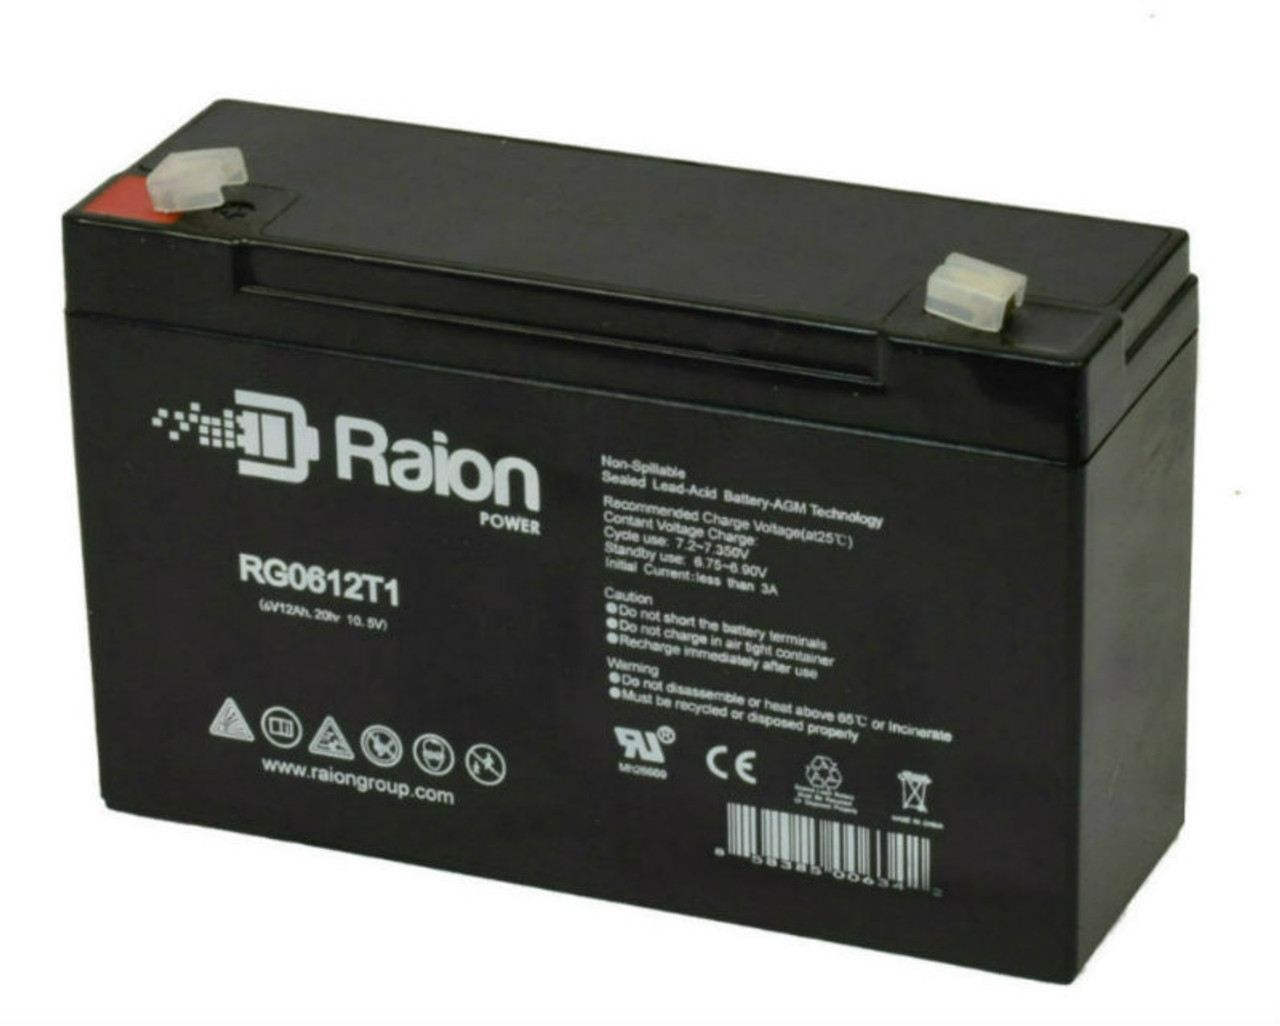 Raion Power RG06120T1 Replacement 6V 12Ah Emergency Light Battery for Dyna-Ray S-18-182